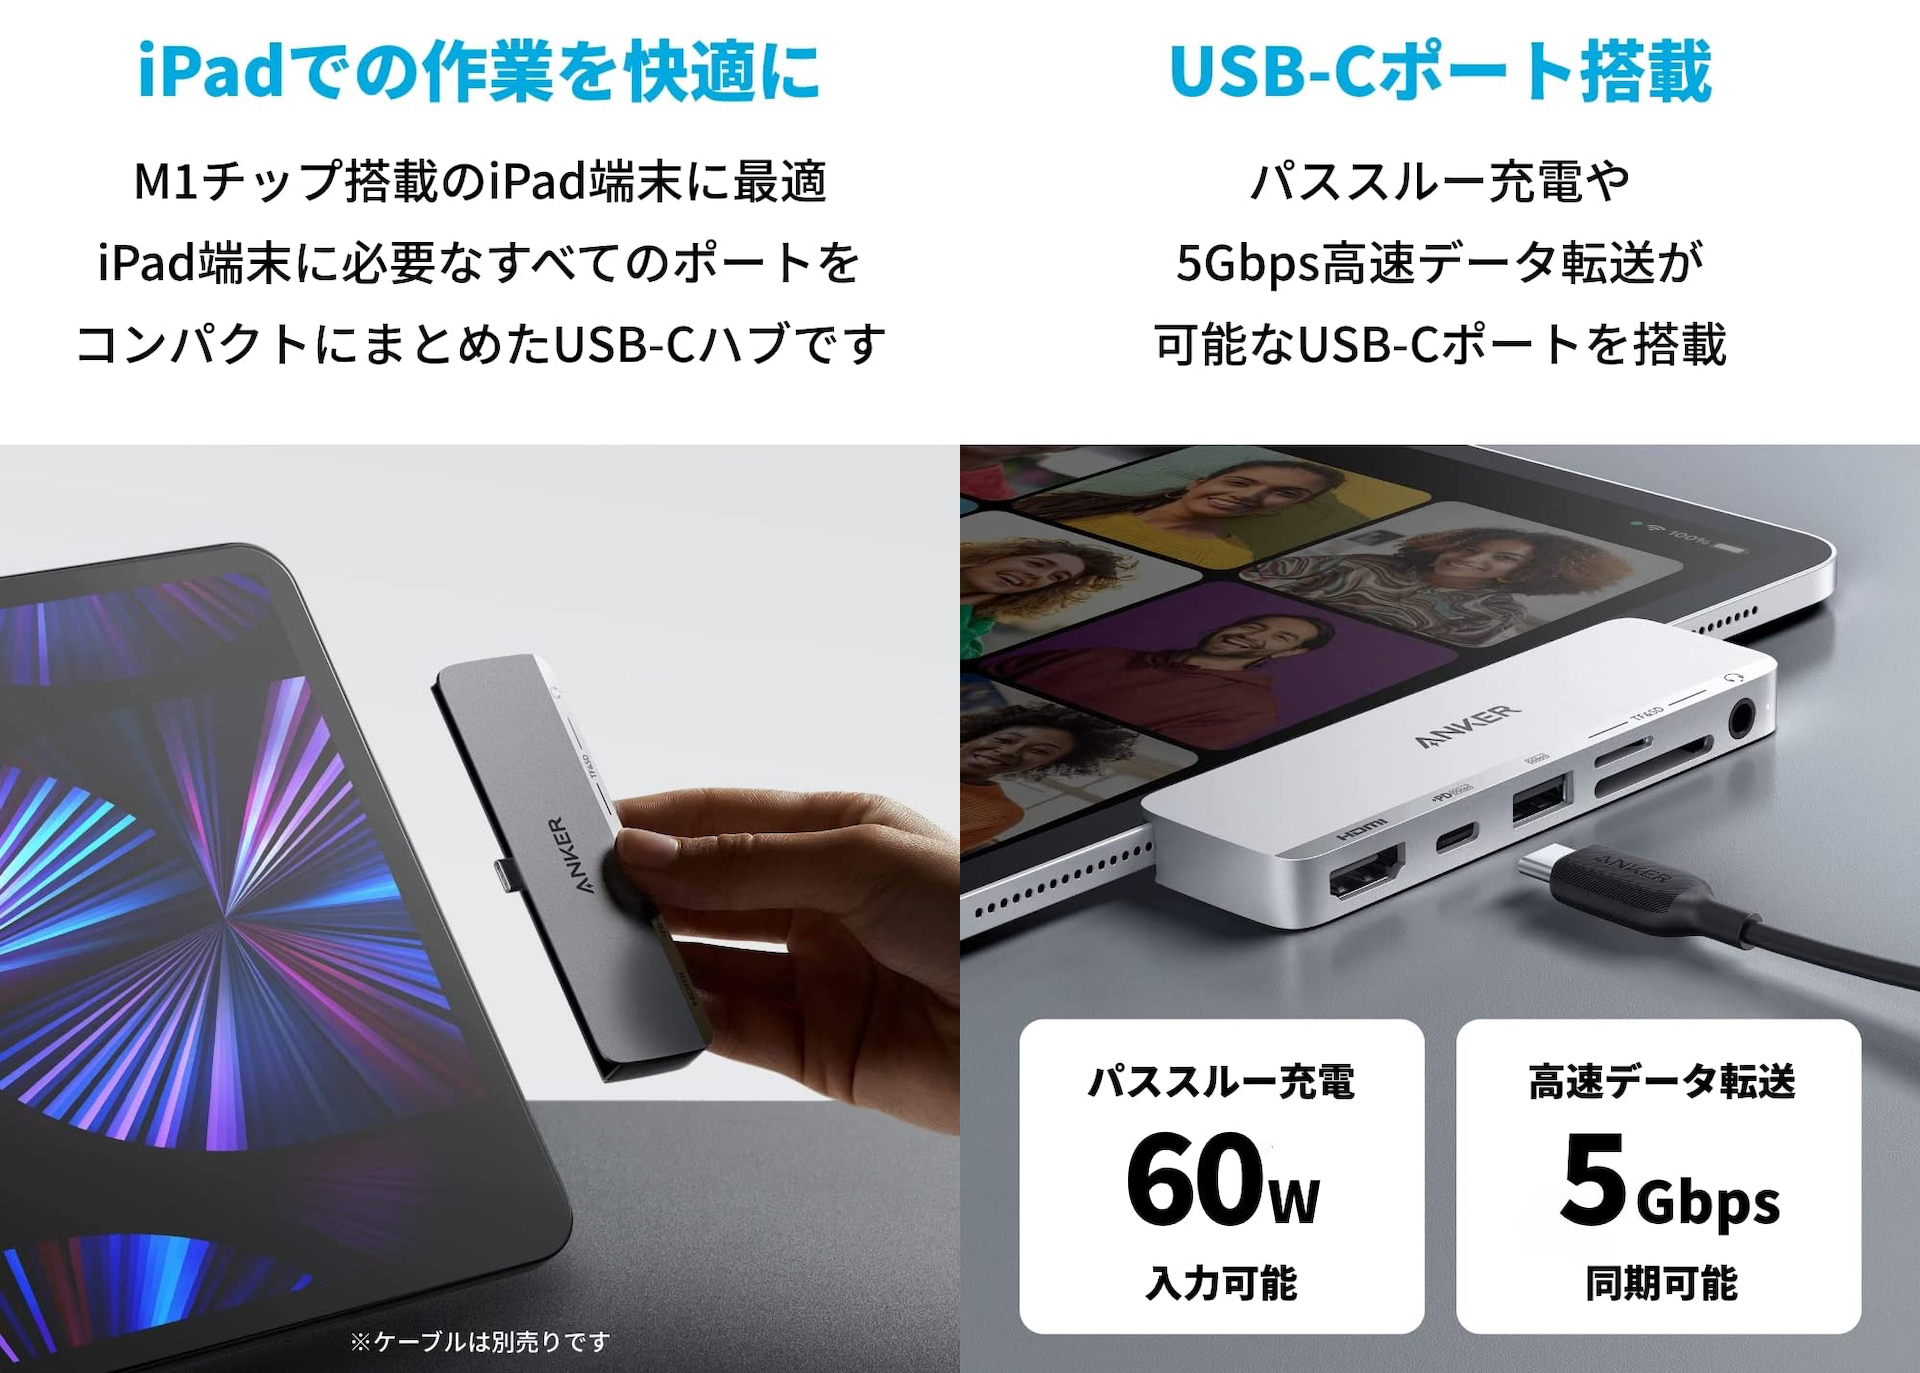 Anker 541 USB-C ハブ（6-in-1, for iPad）